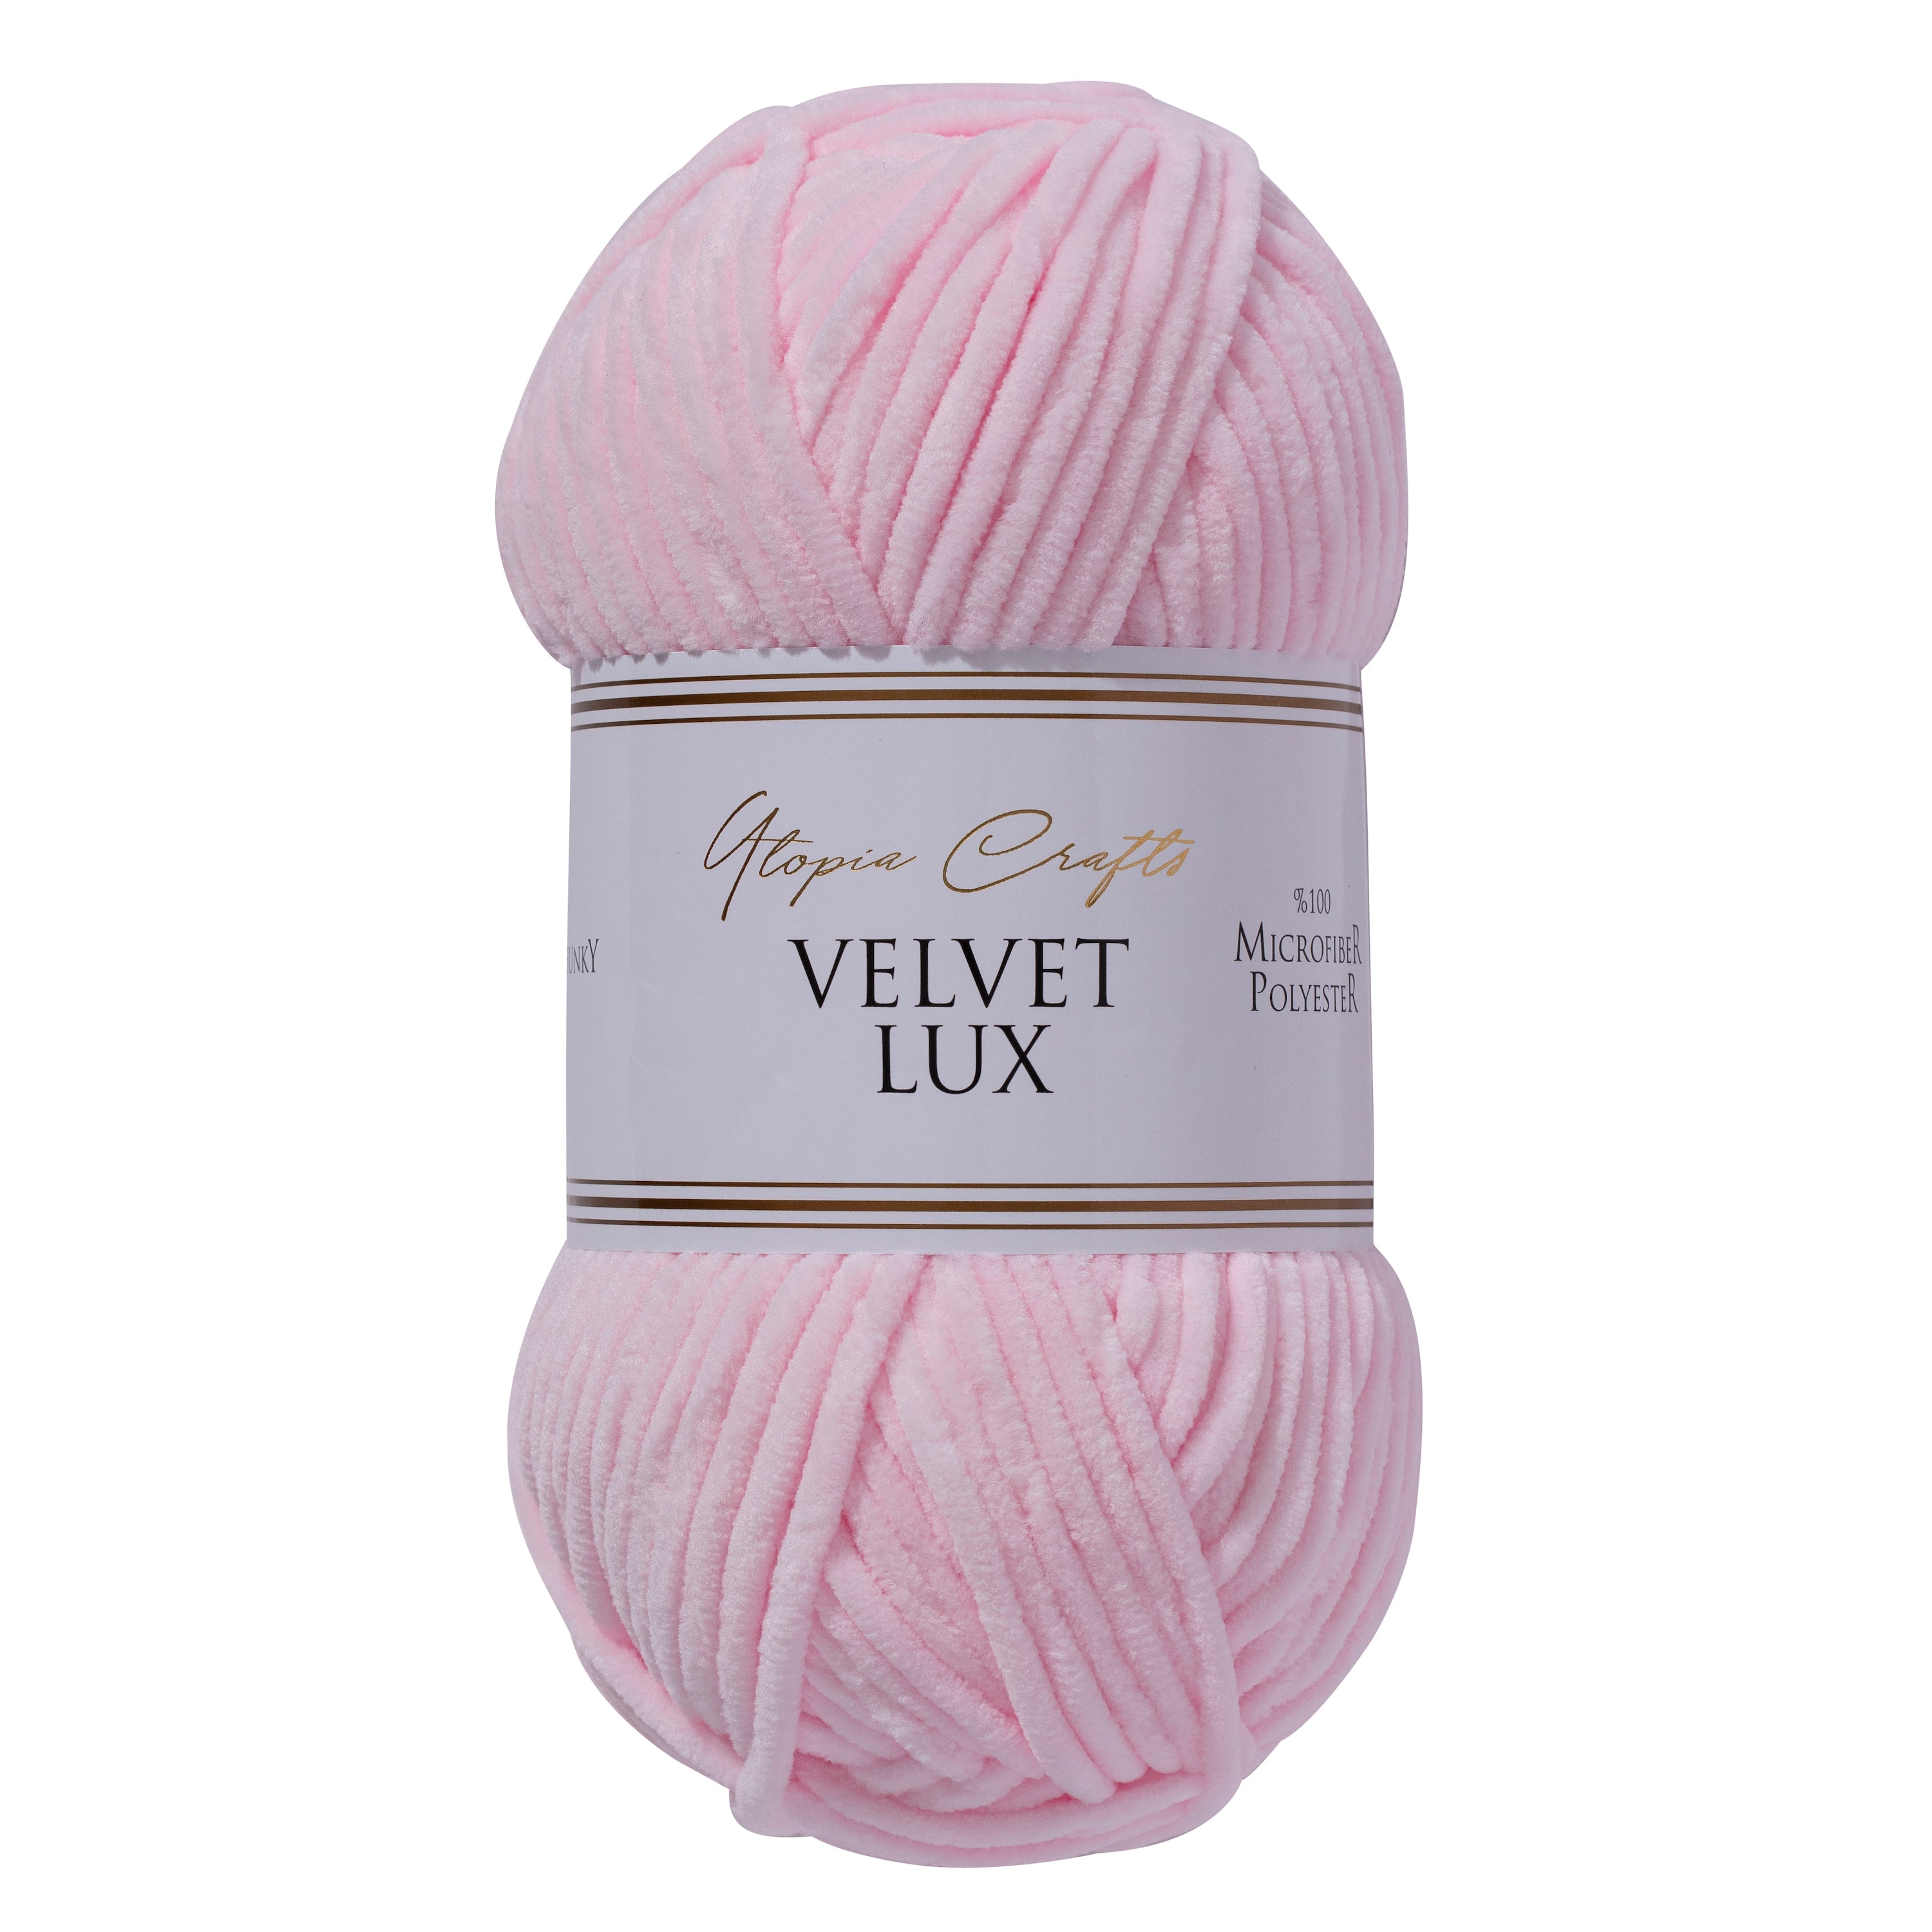 Utopia Crafts Velvet Lux Chenille Super Soft Chunky Yarn for Knitting and Crochet, 100g - 110m (Pink Swan)